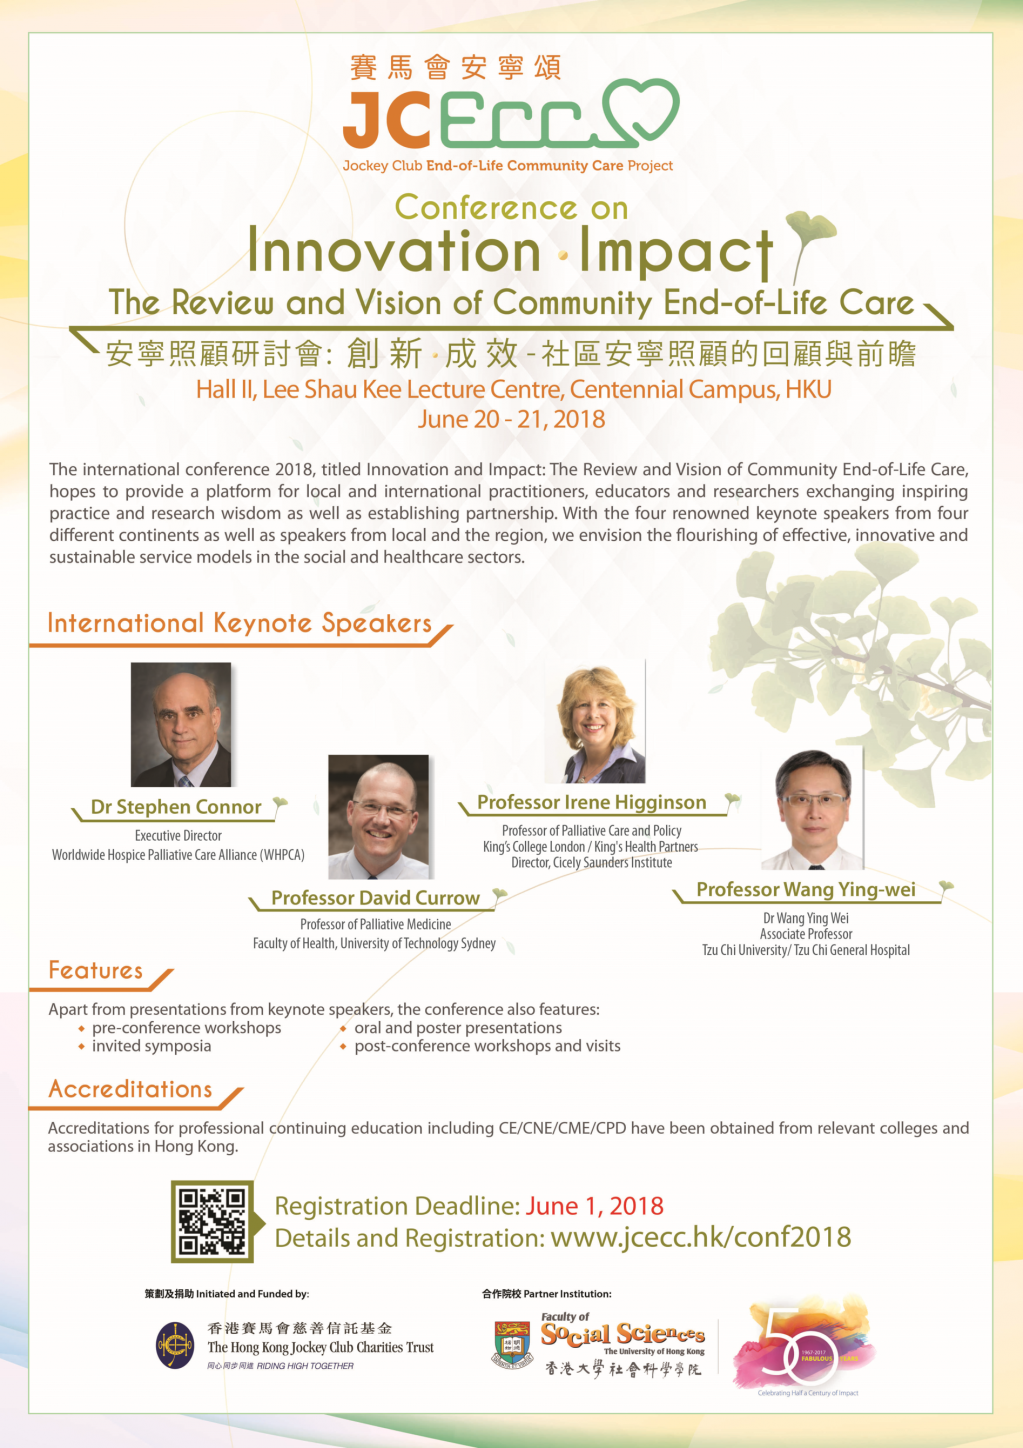 JCECC Conference on Innovation‧Impact: The Review and Vision of Community End-of-Life Care